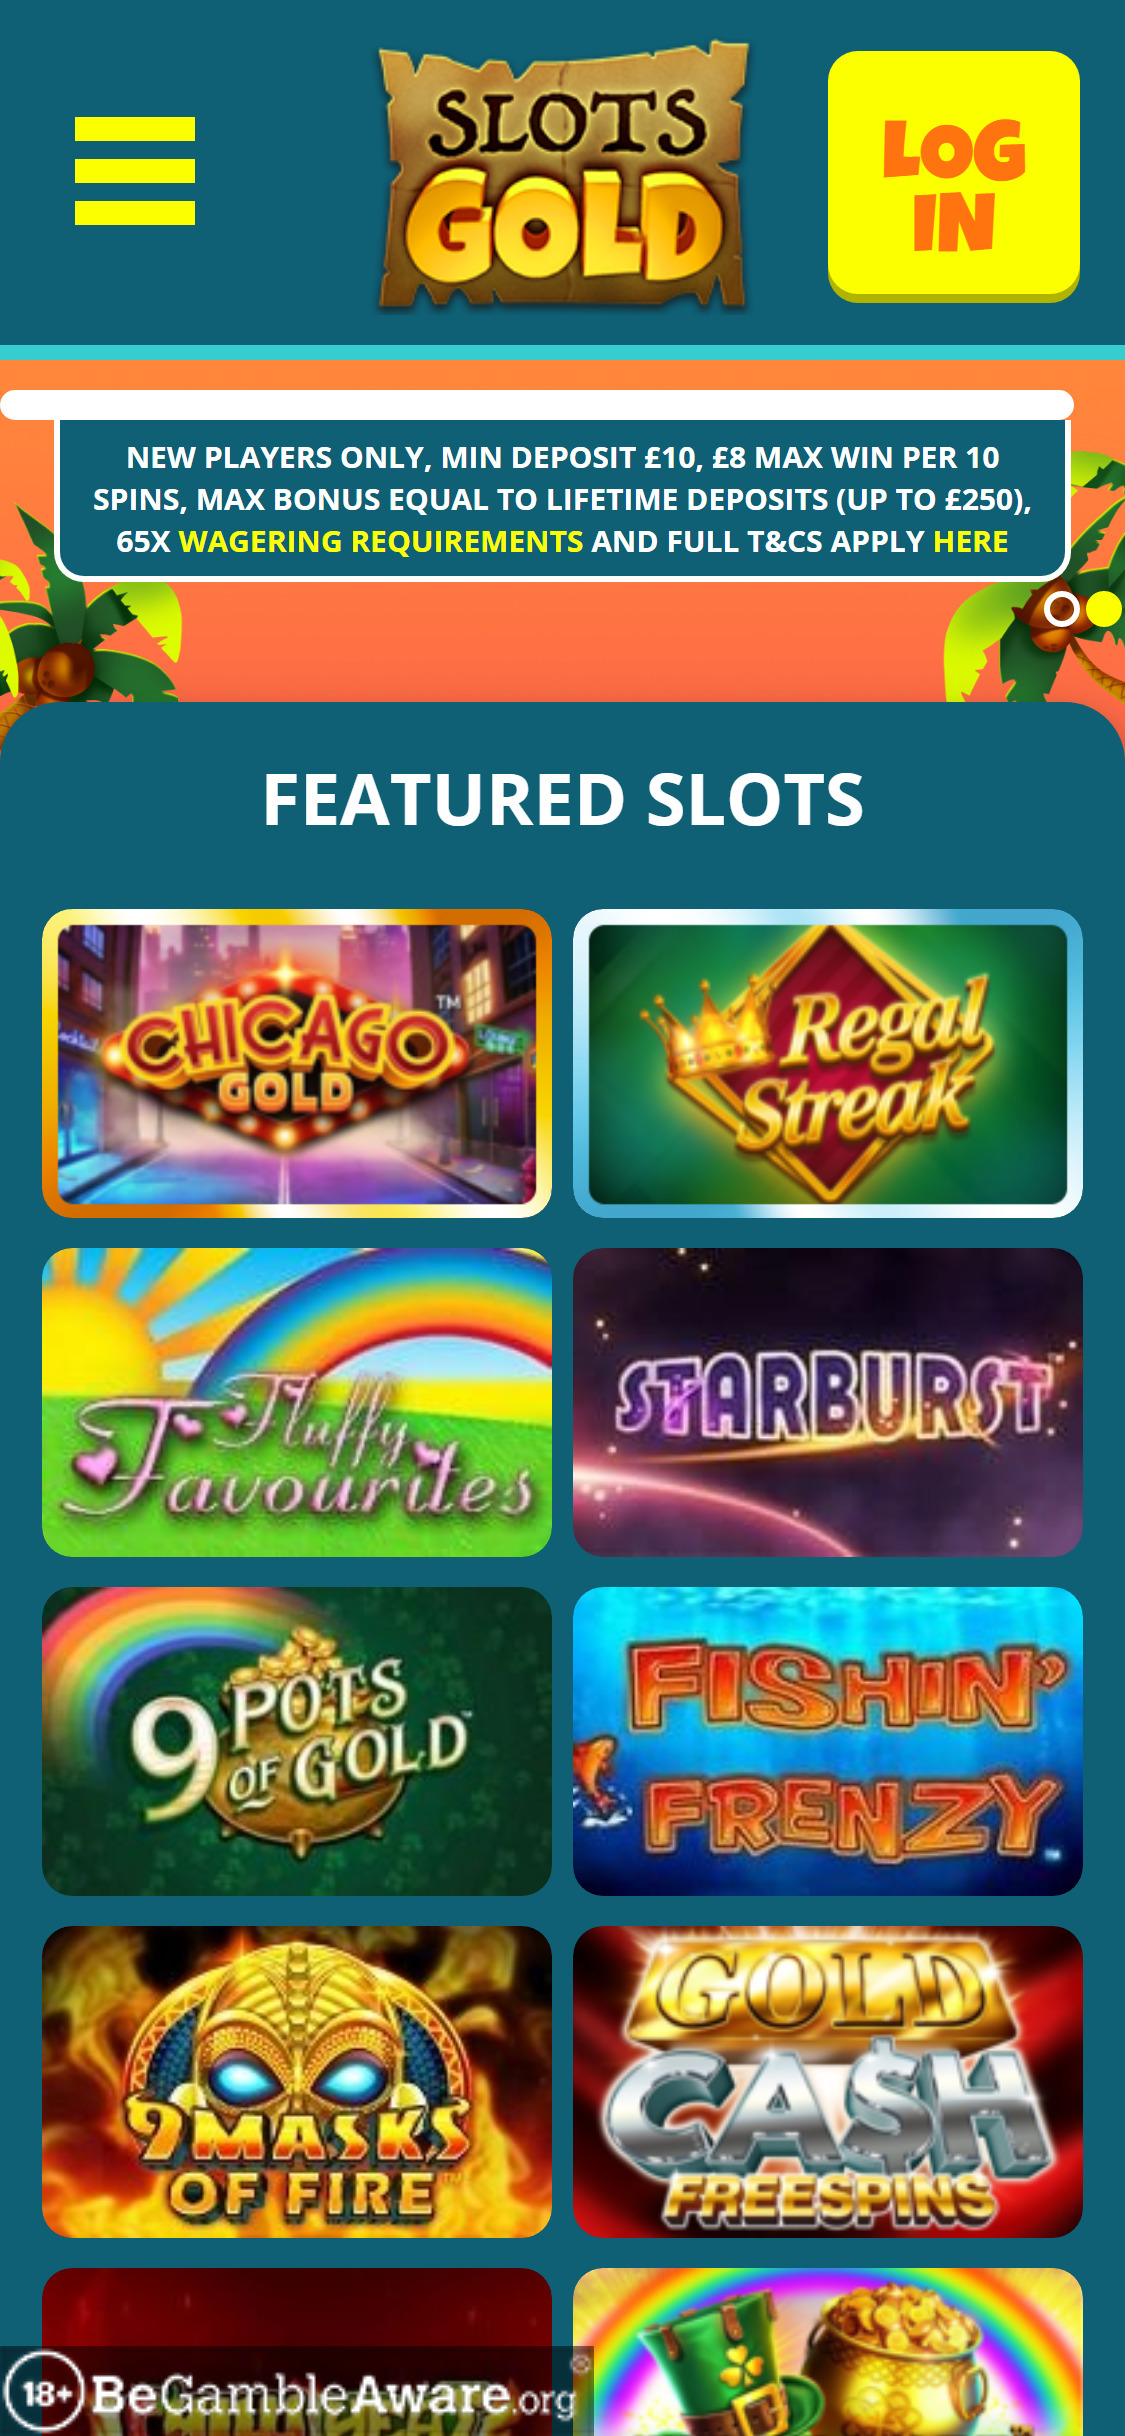 Slots Gold Casino Mobile Review